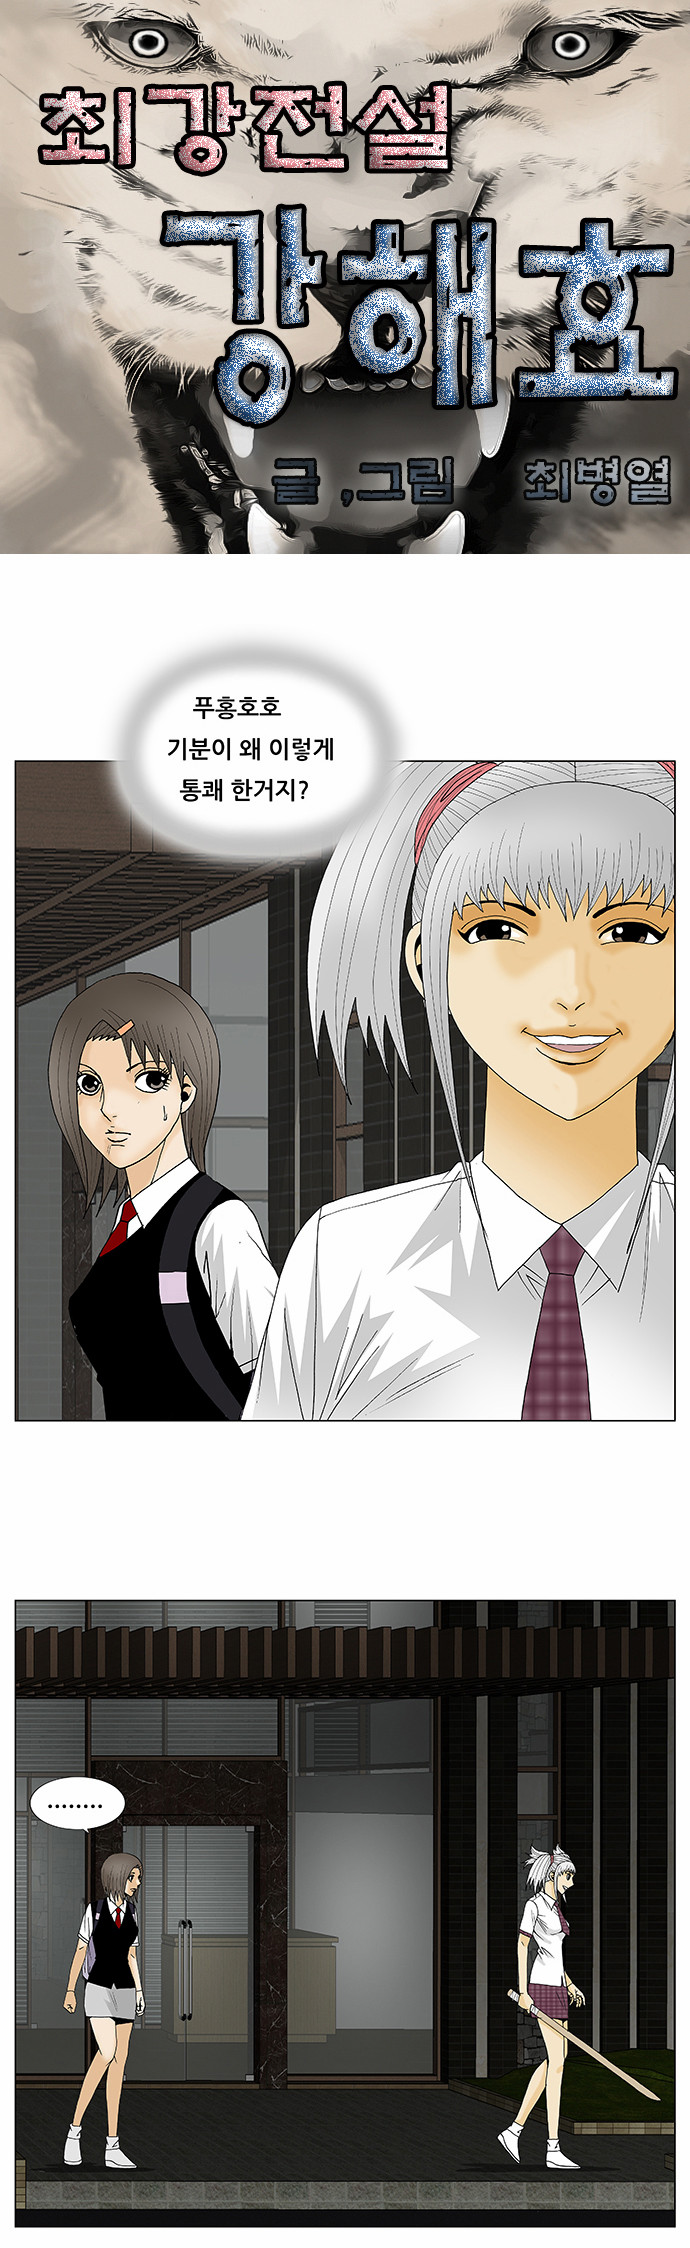 Ultimate Legend - Kang Hae Hyo - Chapter 123 - Page 1